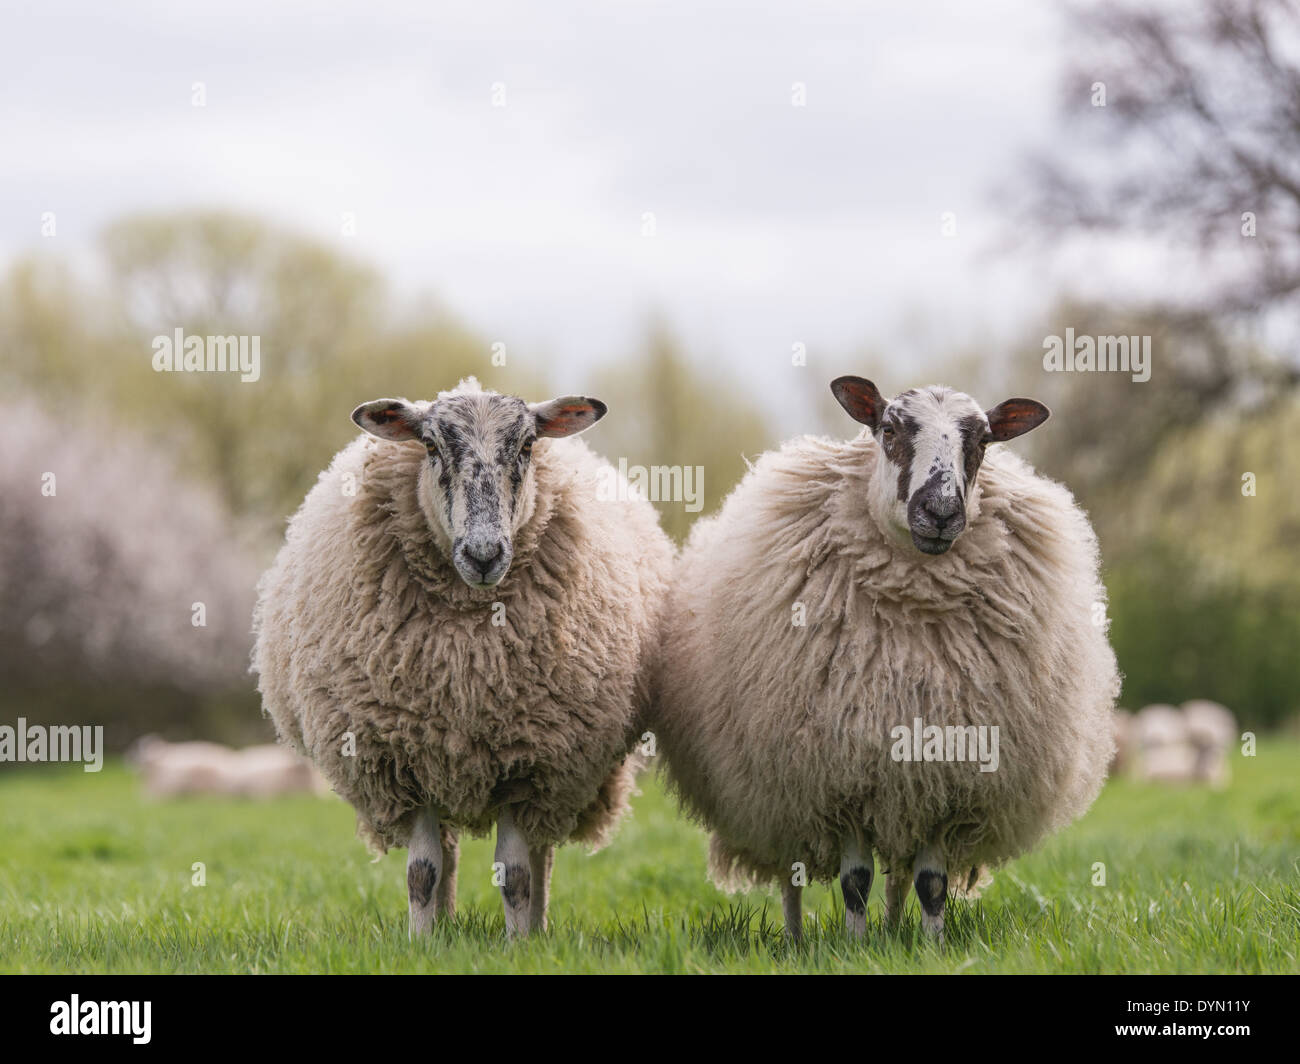 Two woolly sheep standing together in field Stock Photo